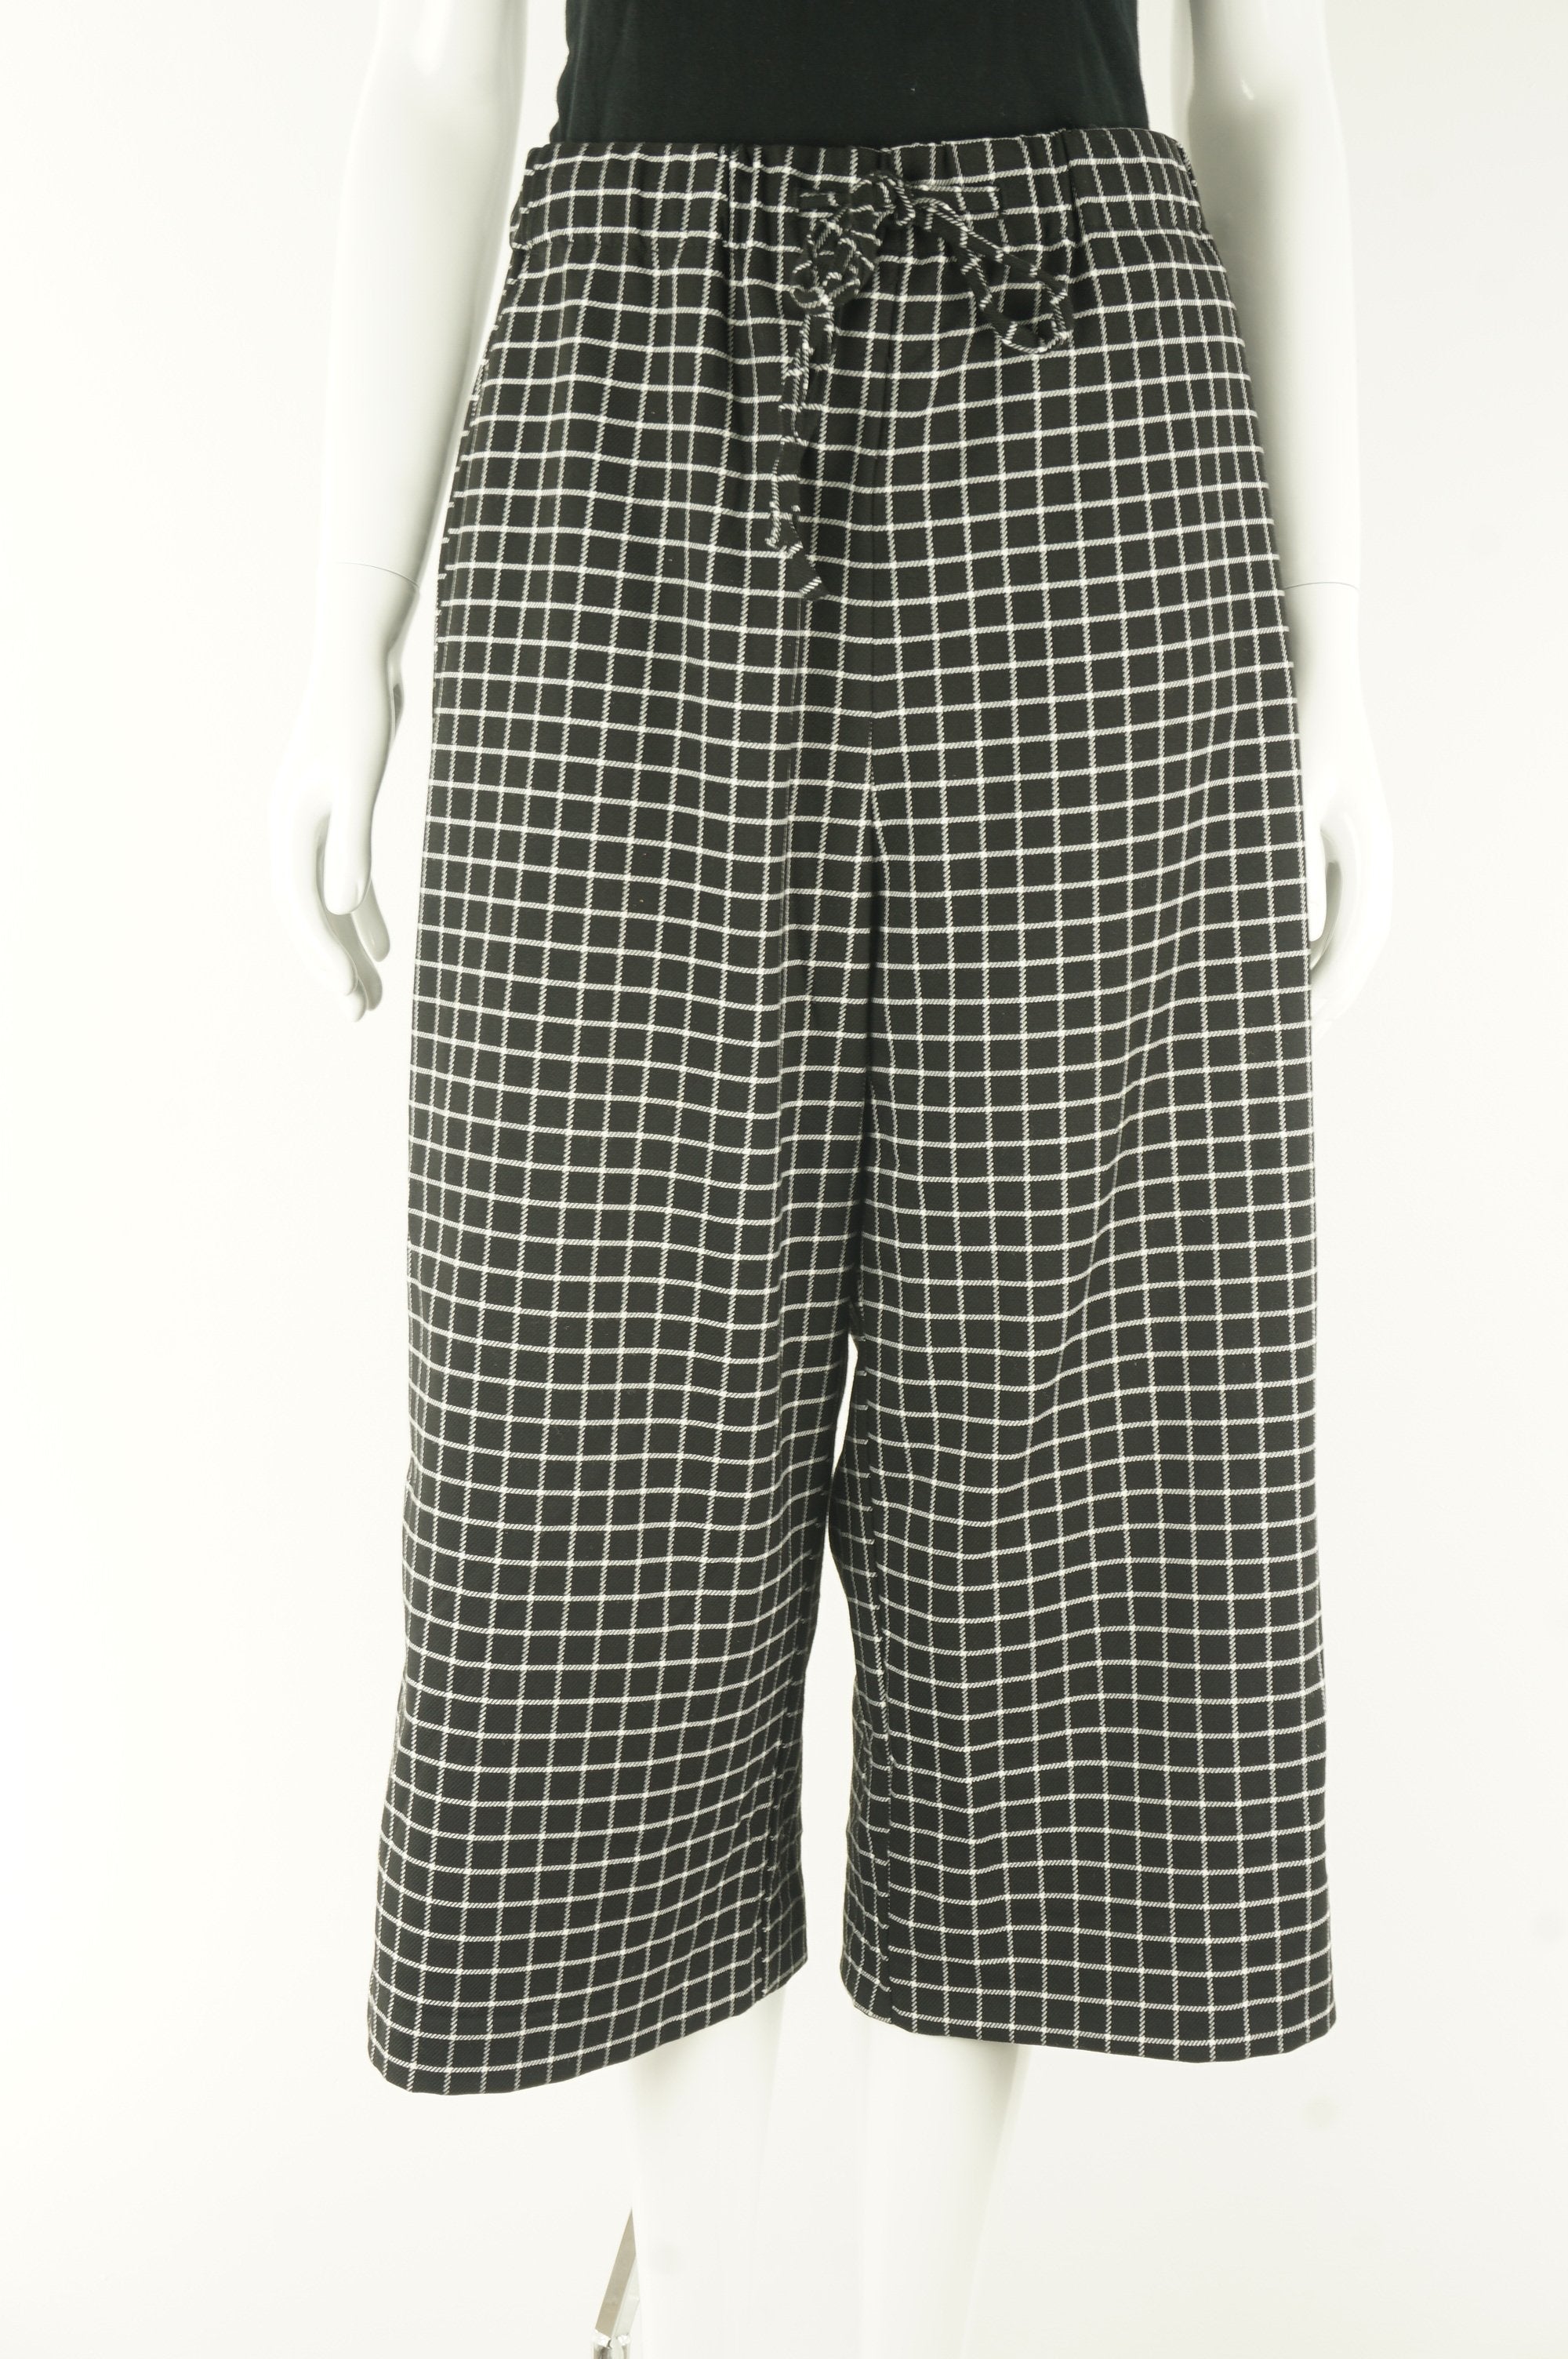 Monki Checked Wide Leg Pants With Elastic Waistband, High waisted wide legged pants are my new favorite! Why? For the exact moment after dinner when you feel overly stuffed but the pants are expandable and hides the food baby…, Black, White, 67% Polyester, 32% Viscose, 1% Elastane, women's Pants, women's Black, White Pants, Monki women's Pants, Women's wide legged checker  capri pants, women's loose fitting checker capri trousers